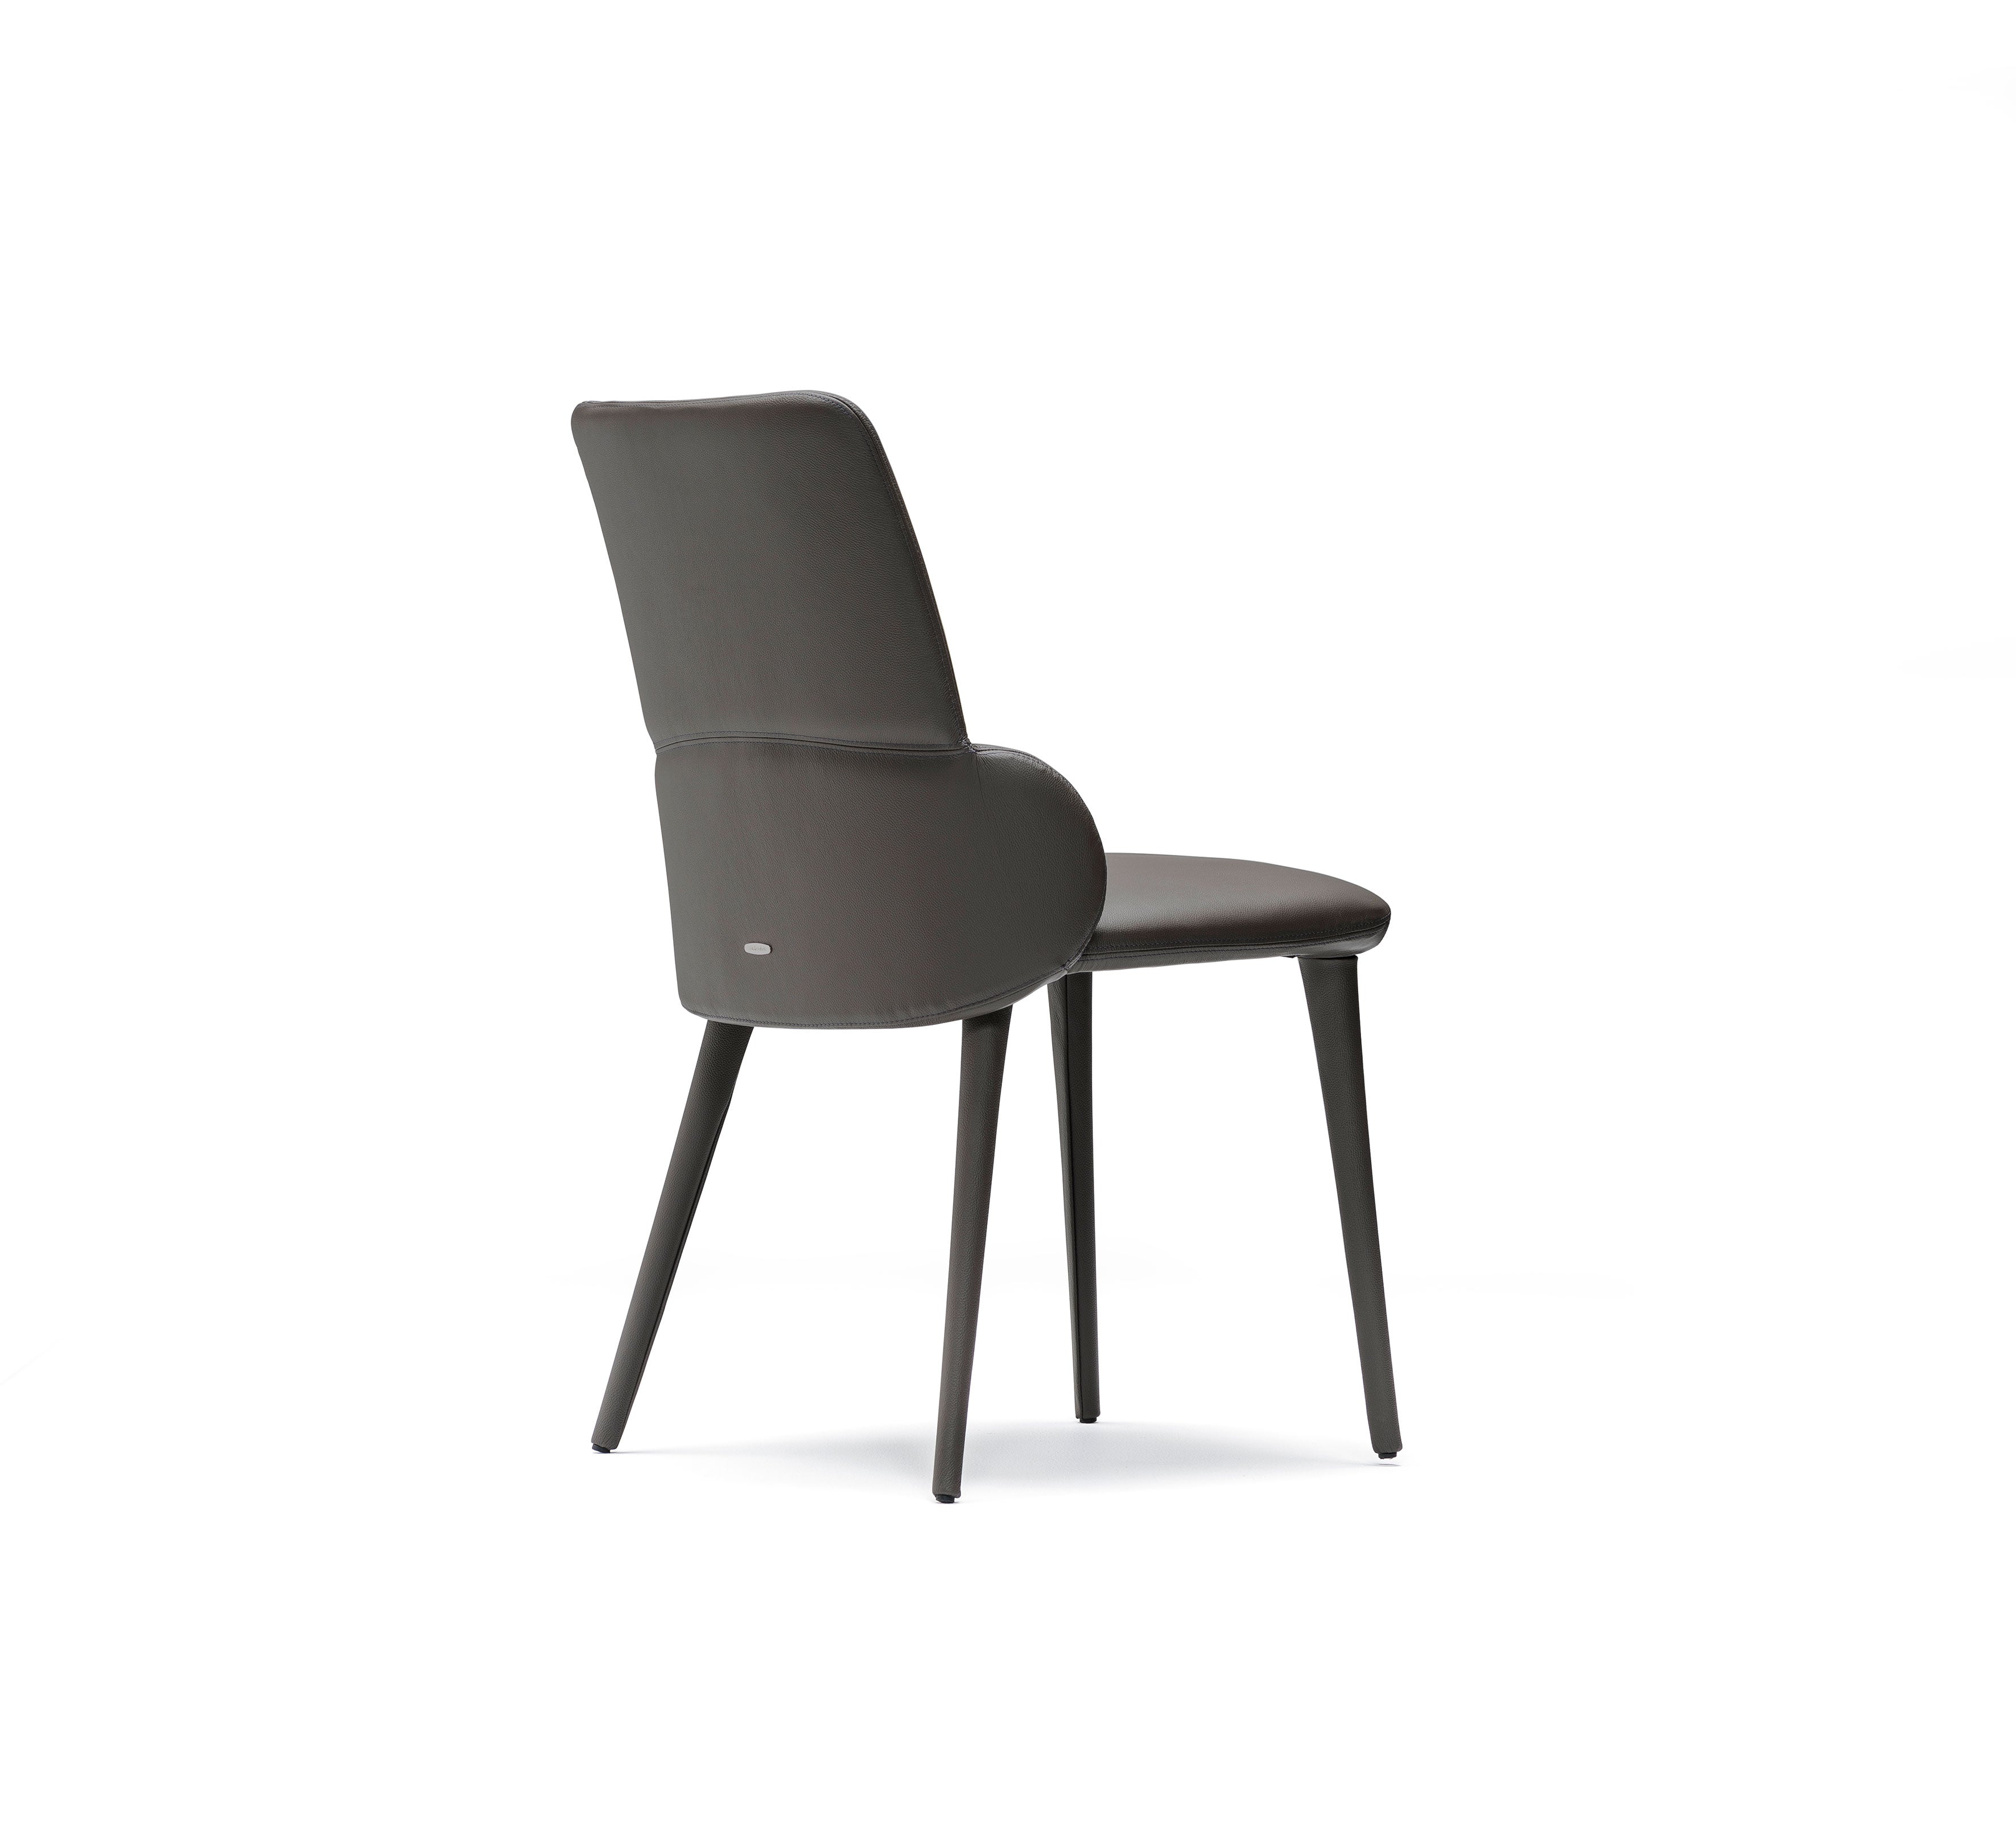 Cattelan Italia Ginger Chair With Steel Frame And Covered In Fabric